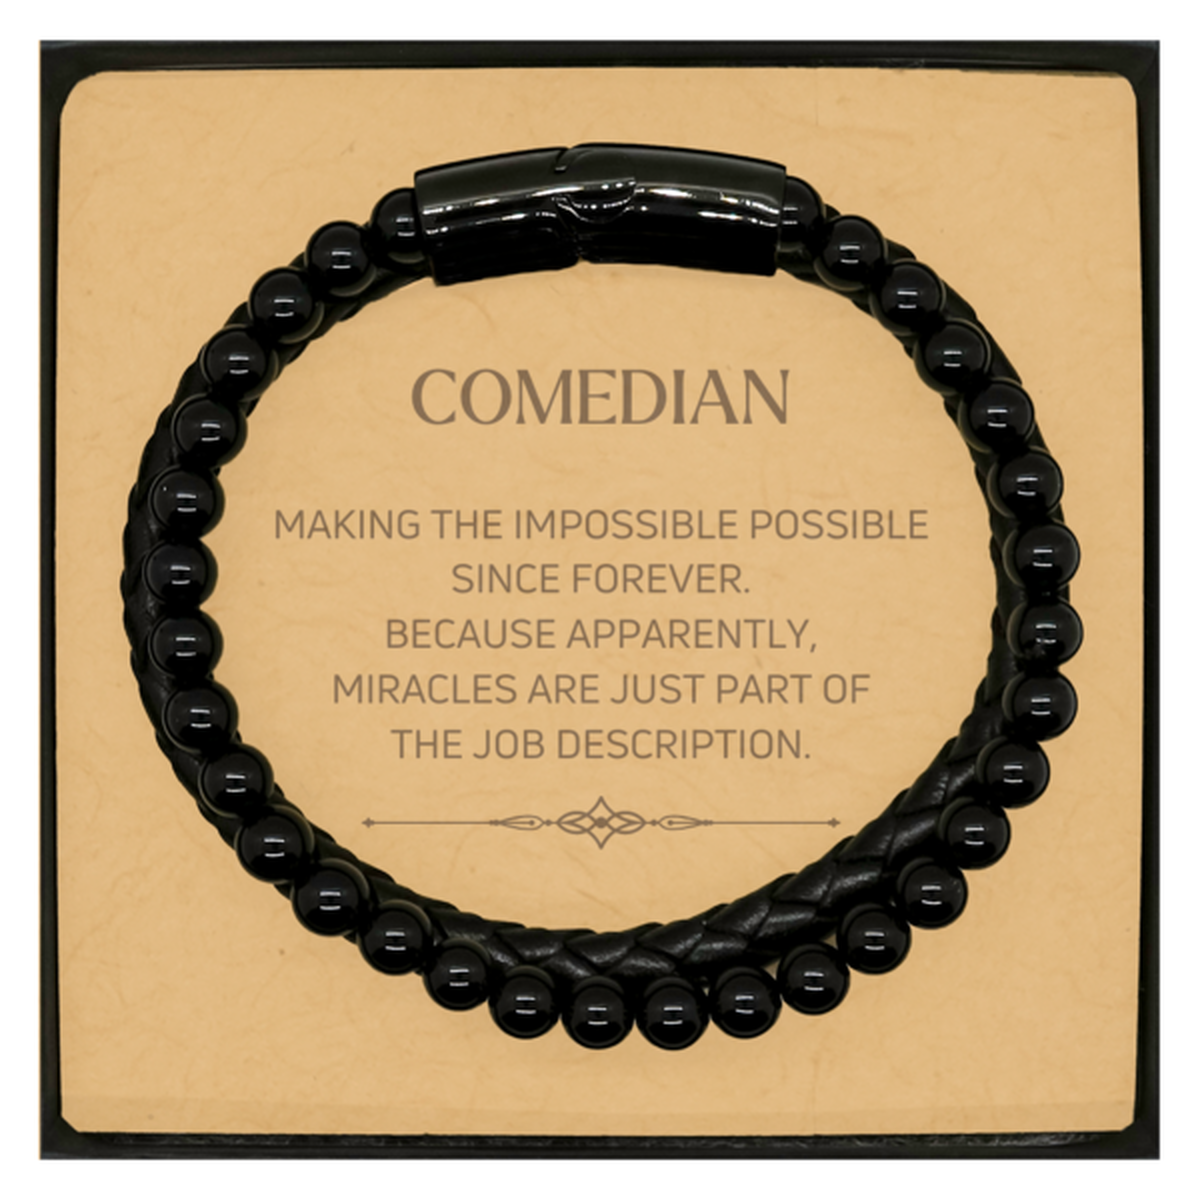 Funny Comedian Gifts, Miracles are just part of the job description, Inspirational Birthday Christmas Stone Leather Bracelets For Comedian, Men, Women, Coworkers, Friends, Boss